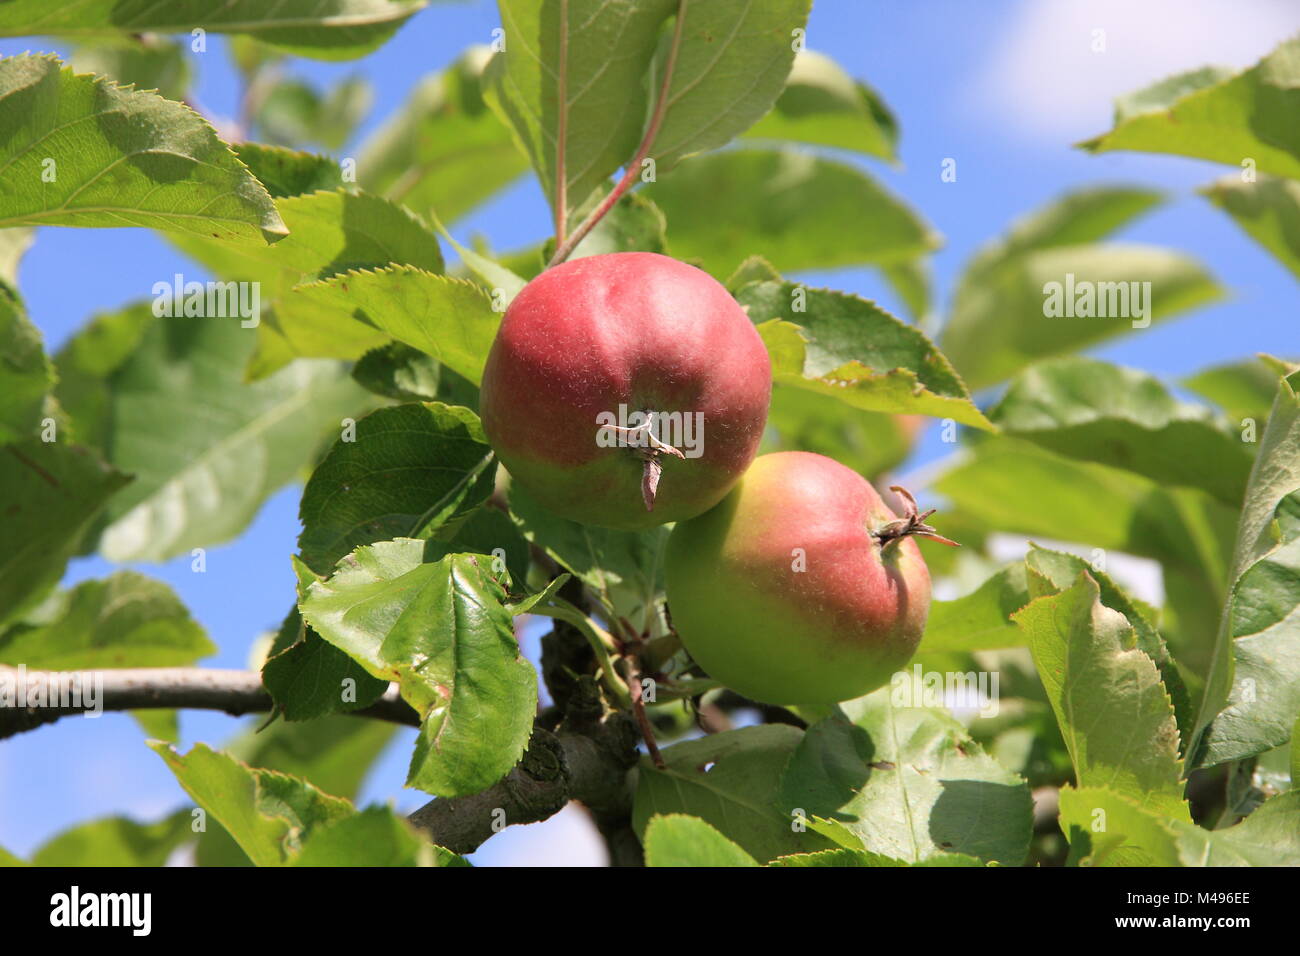 Red-cheeked apples Stock Photo